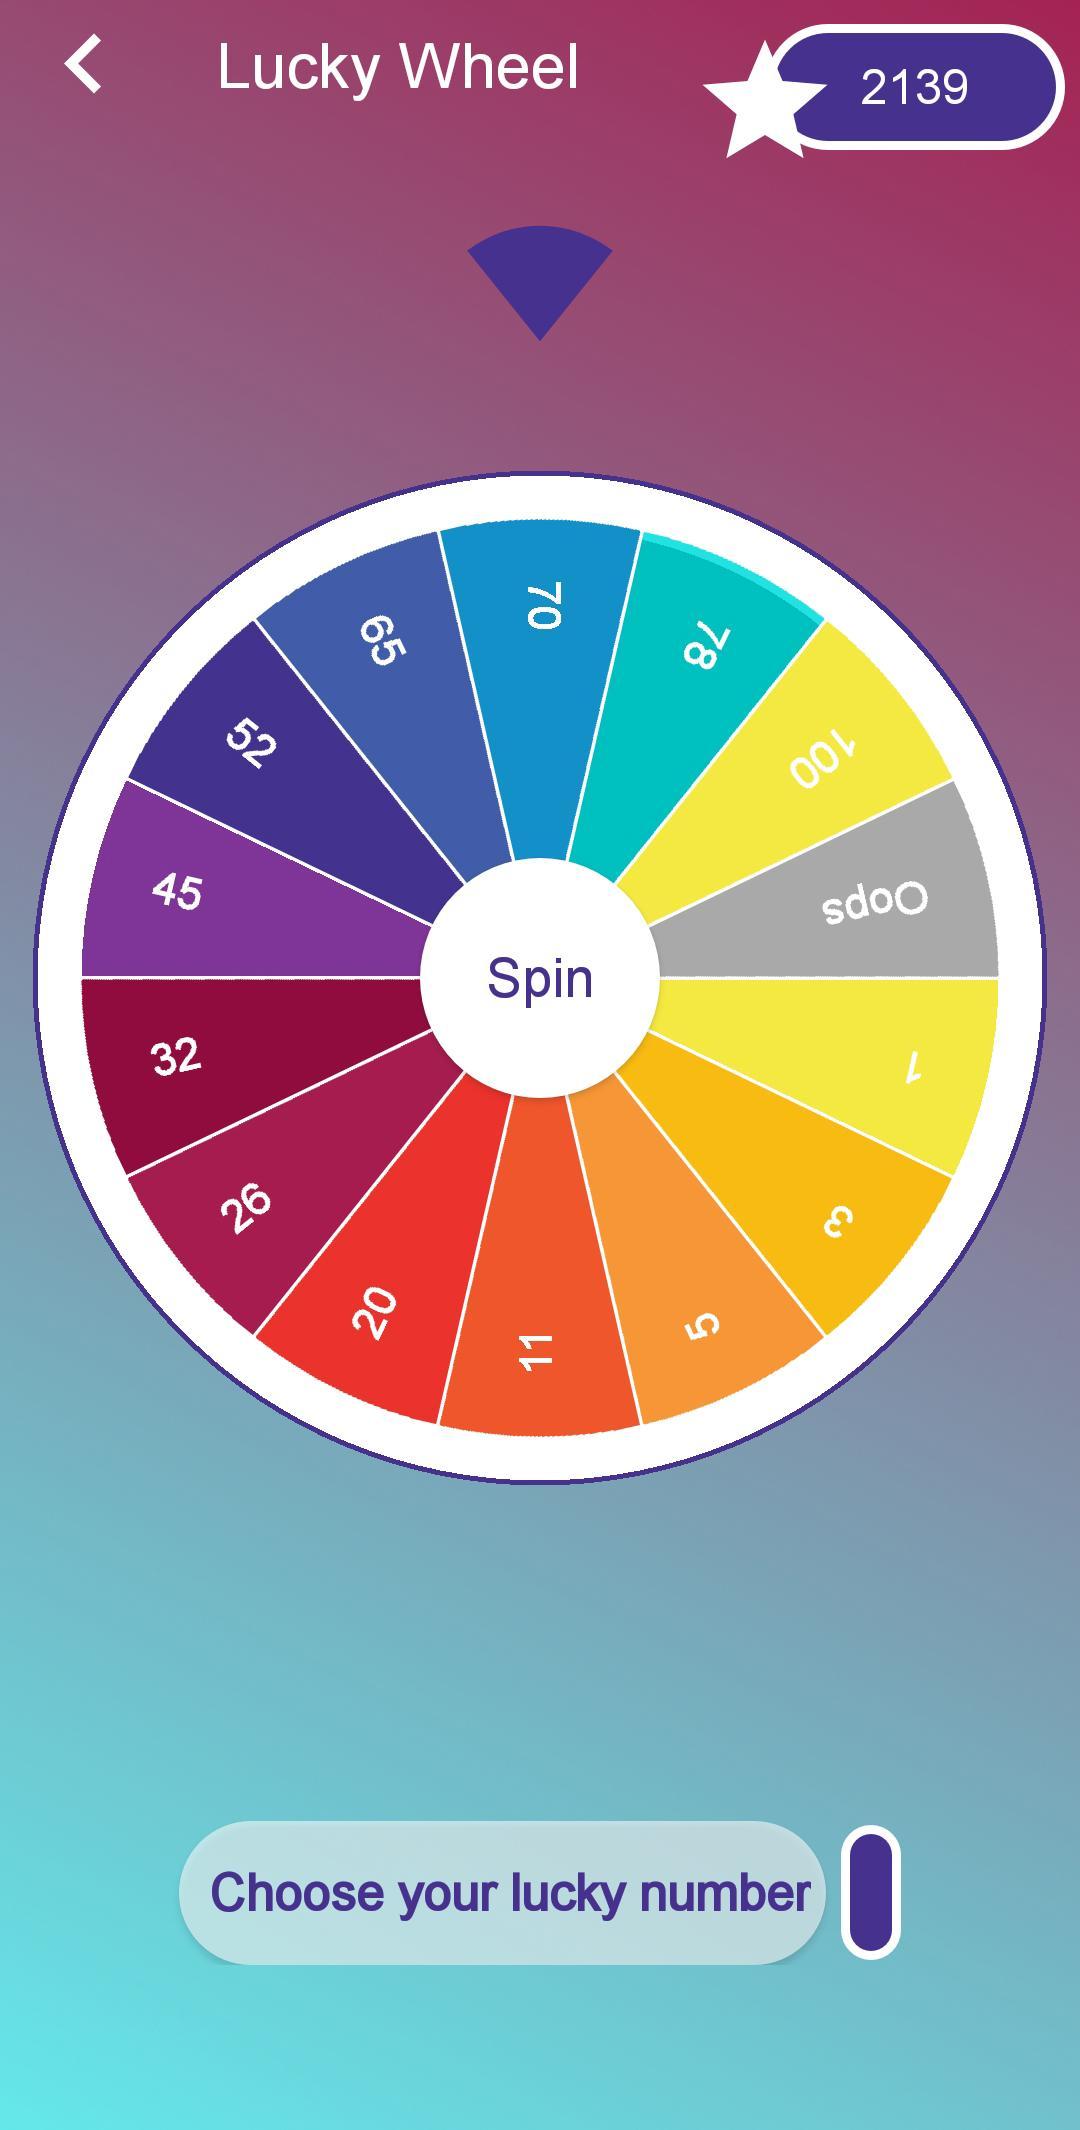 Spin for Spin. Spin money. Earn multiple rewards for reaching Levels in Puzzle Spy Level 450 photos.